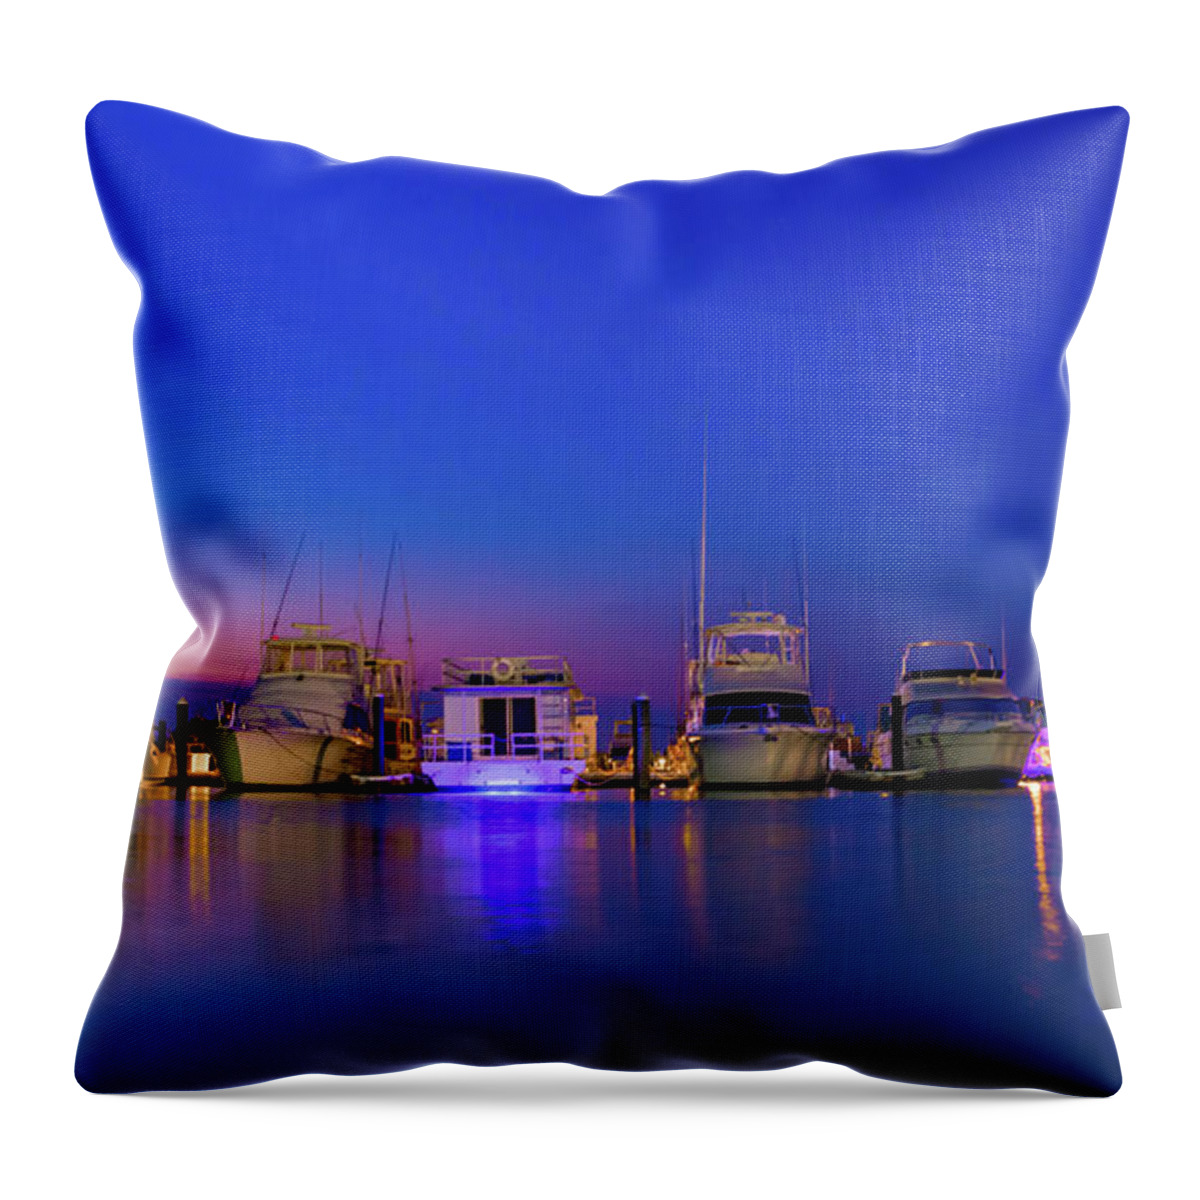 Boats Throw Pillow featuring the photograph Boat Life Indian River Marina Delaware Seashore State Park by Jodi Lyn